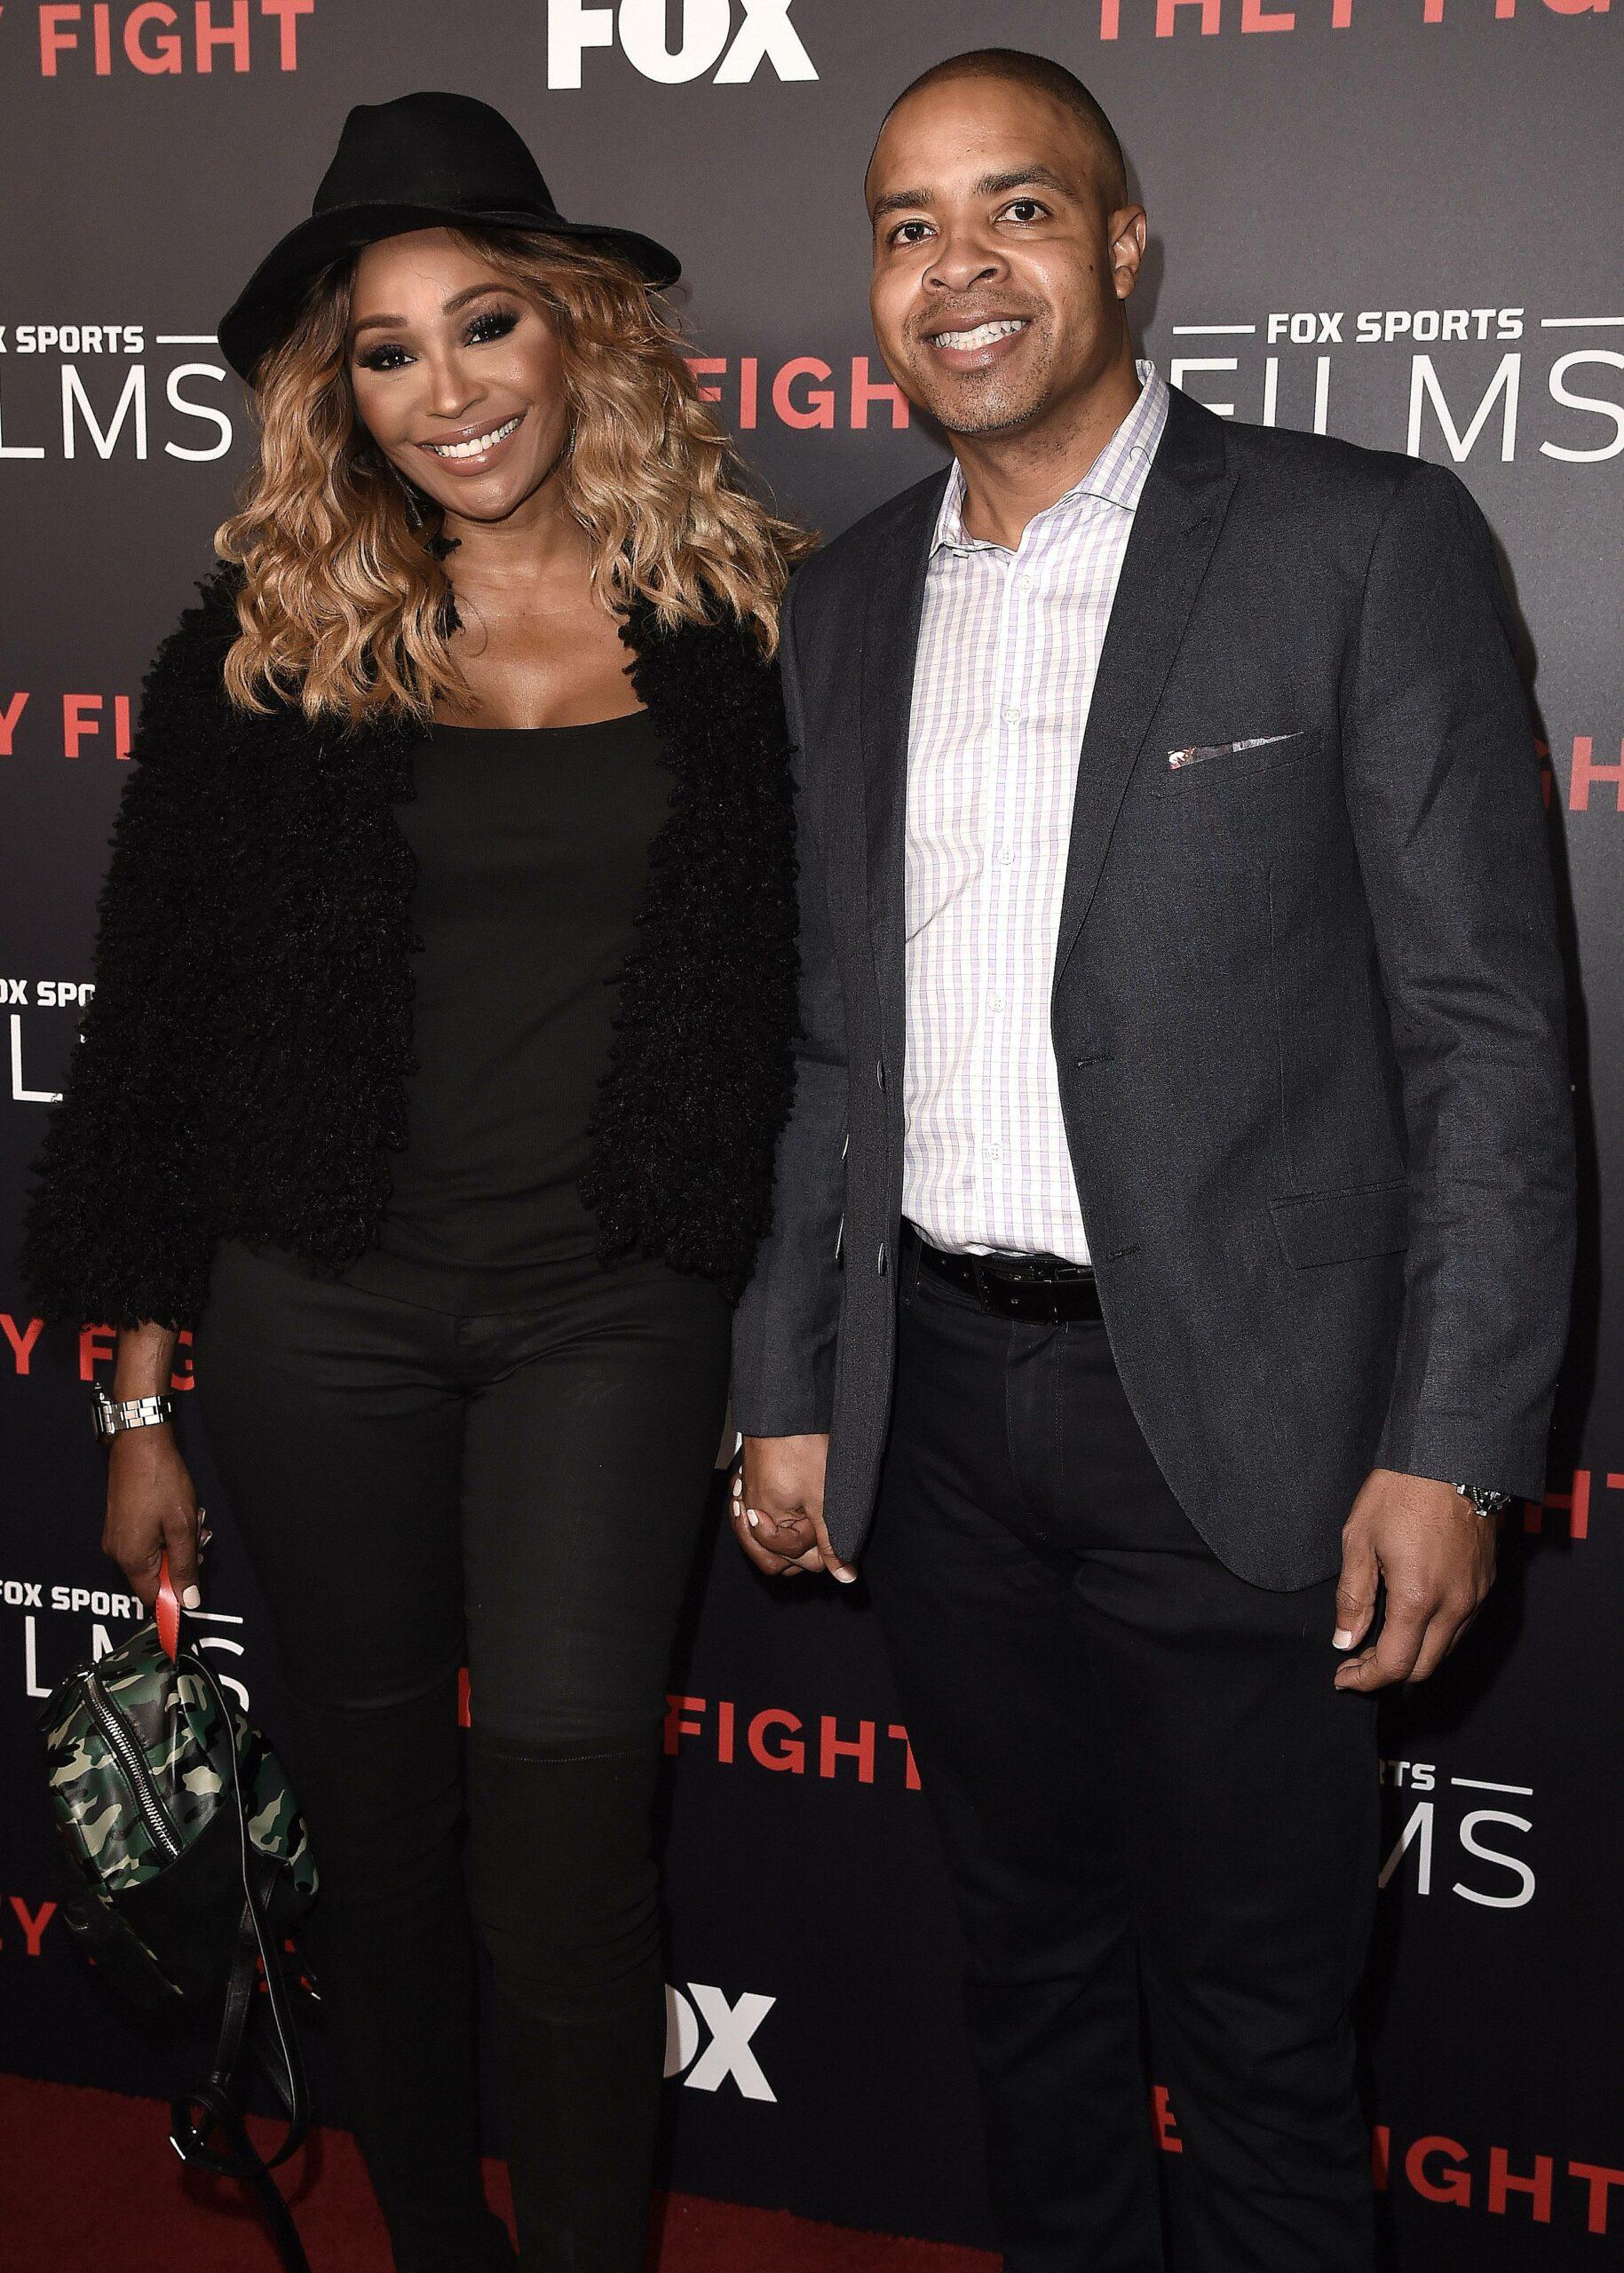 Cynthia Bailey & Mike Hill at the Los Angeles premiere of FOX Sports Films' "They Fight"